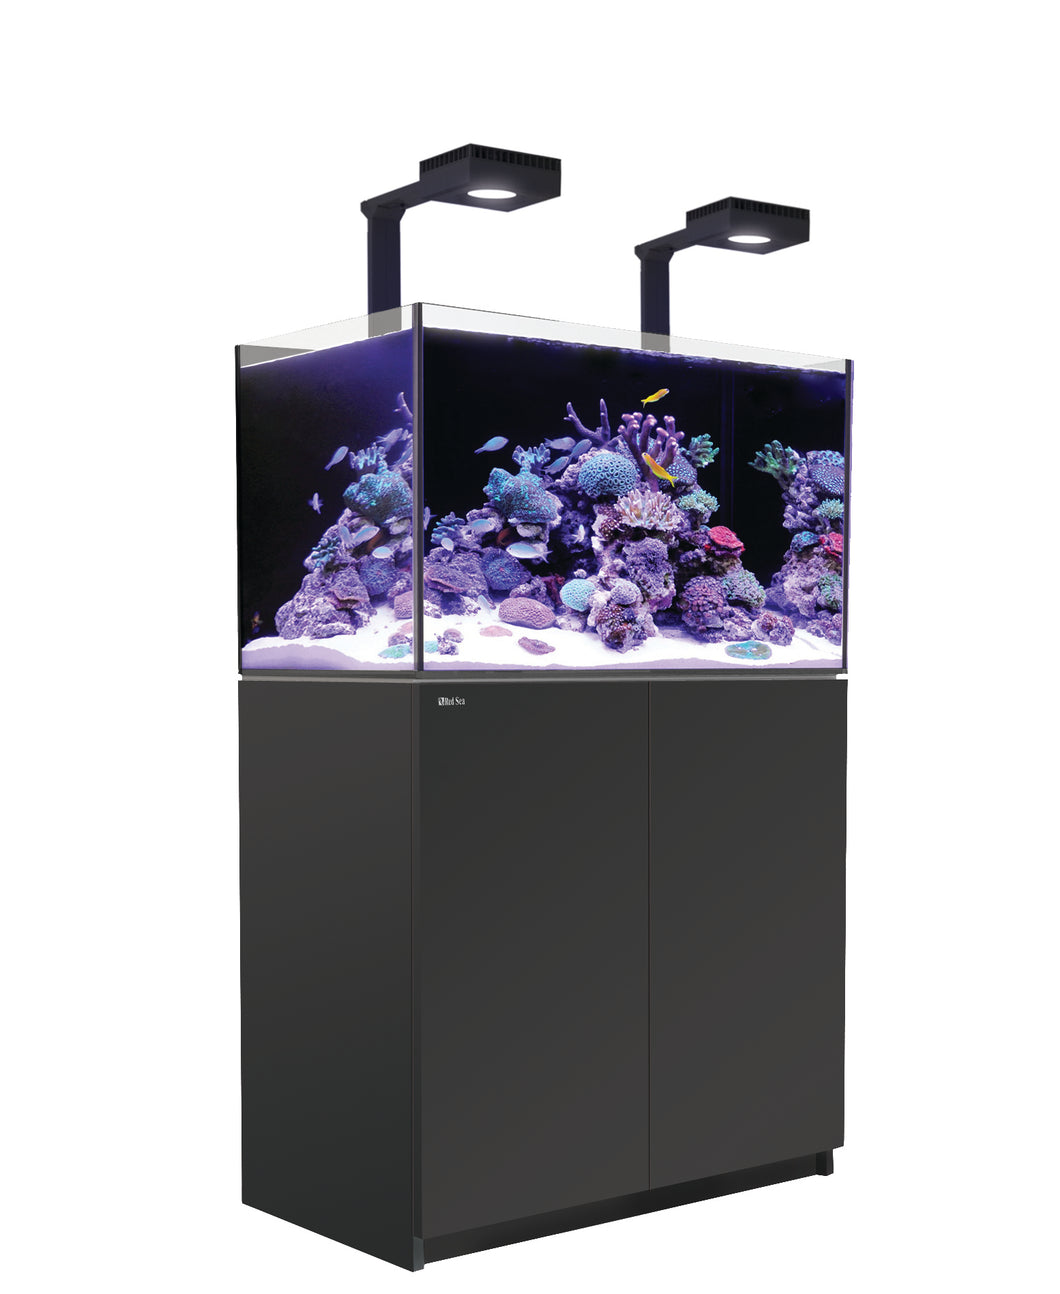 Red Sea REEFER-250 G2 Deluxe Premium Reef Aquarium 65 Gallons Reef-Ready LED Systems